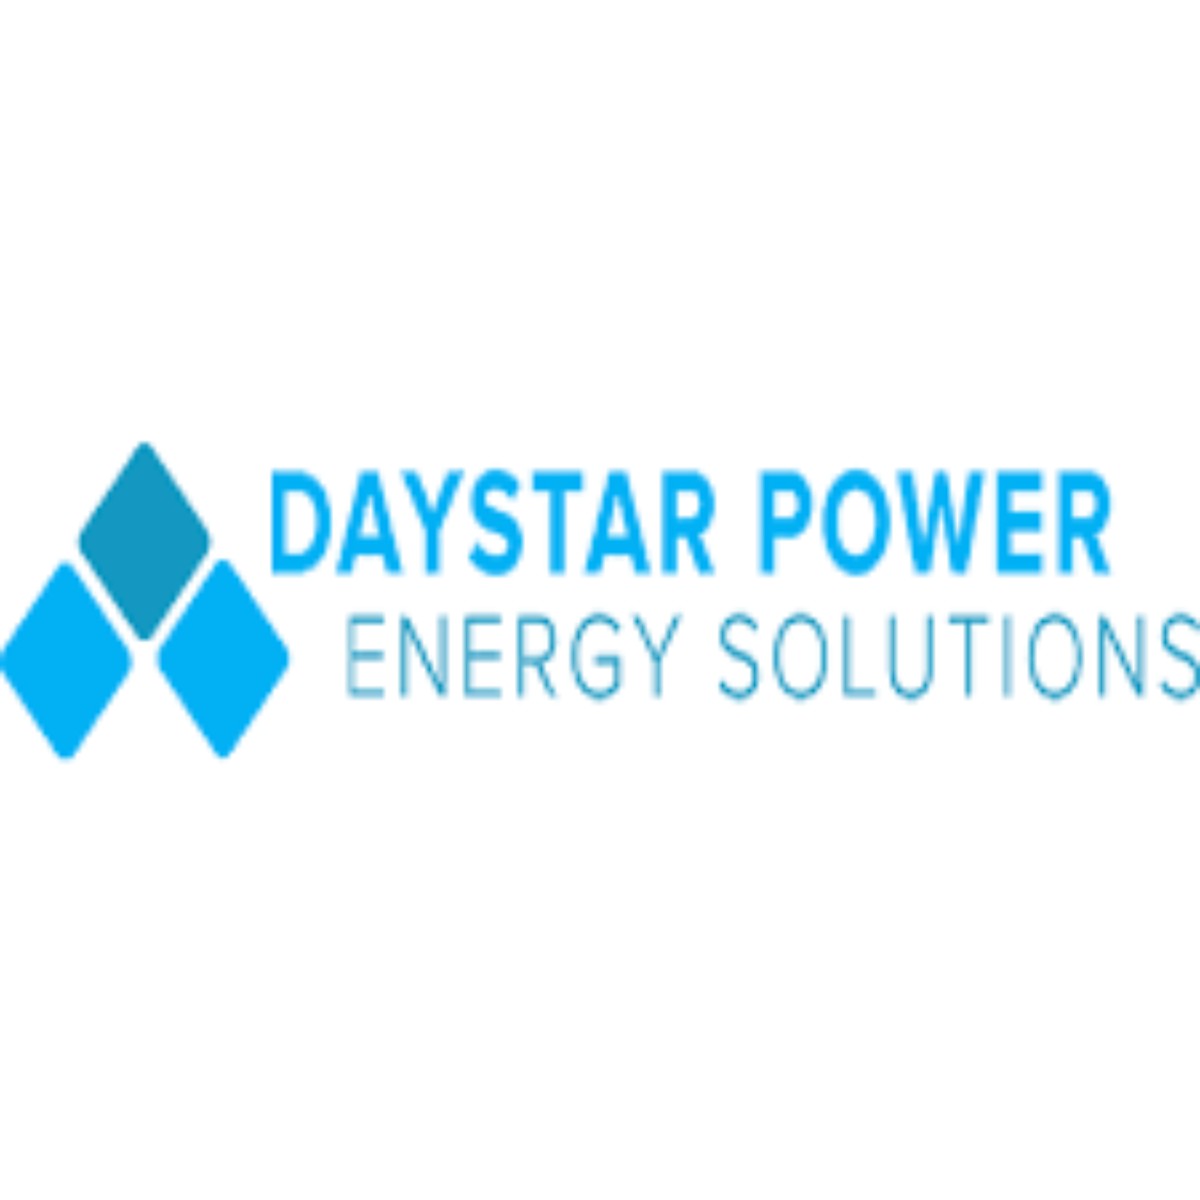 Project Engineers at Daystar Power, Nigeria